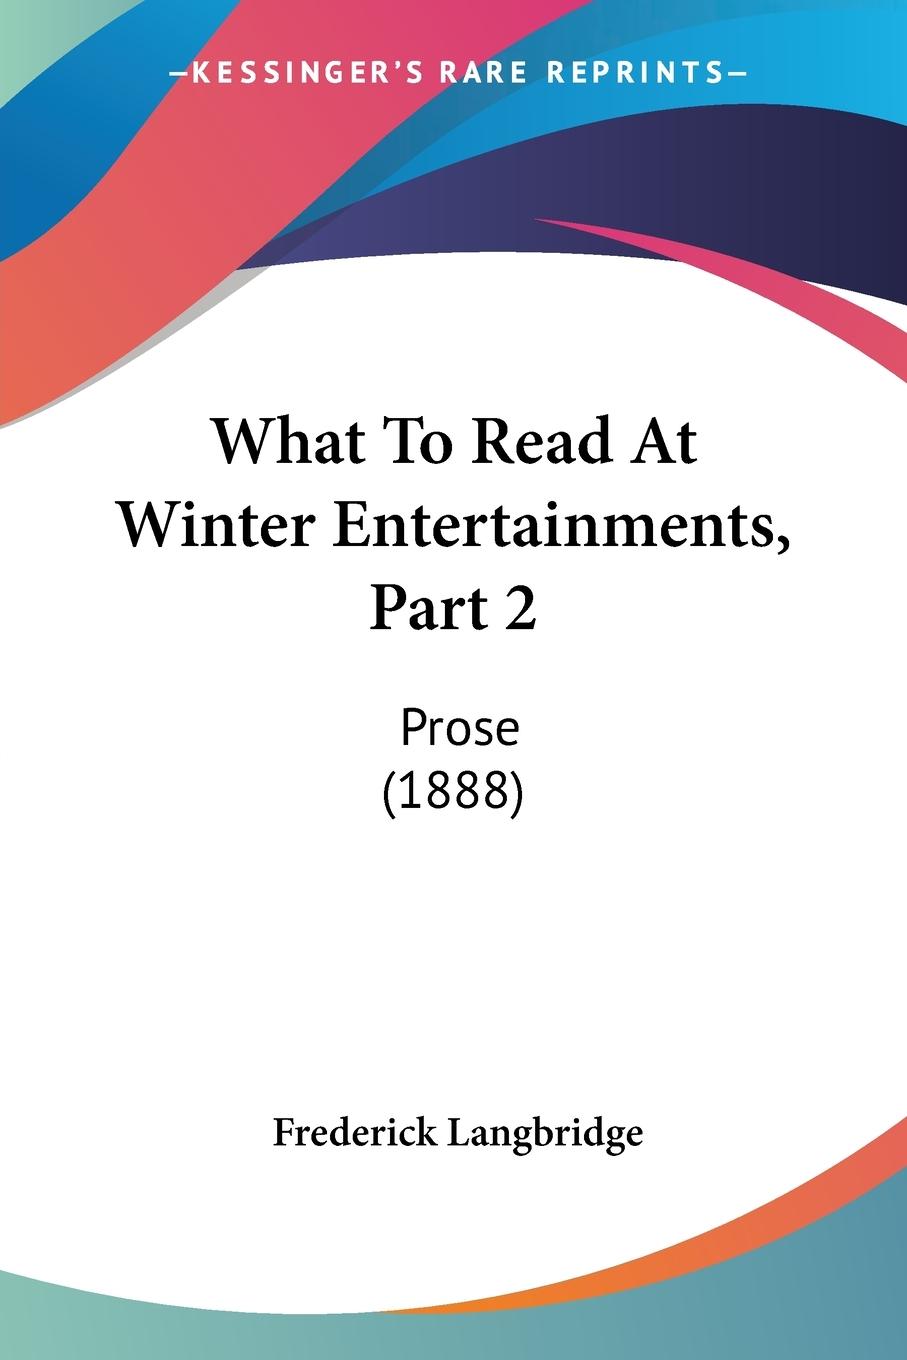 What To Read At Winter Entertainments, Part 2